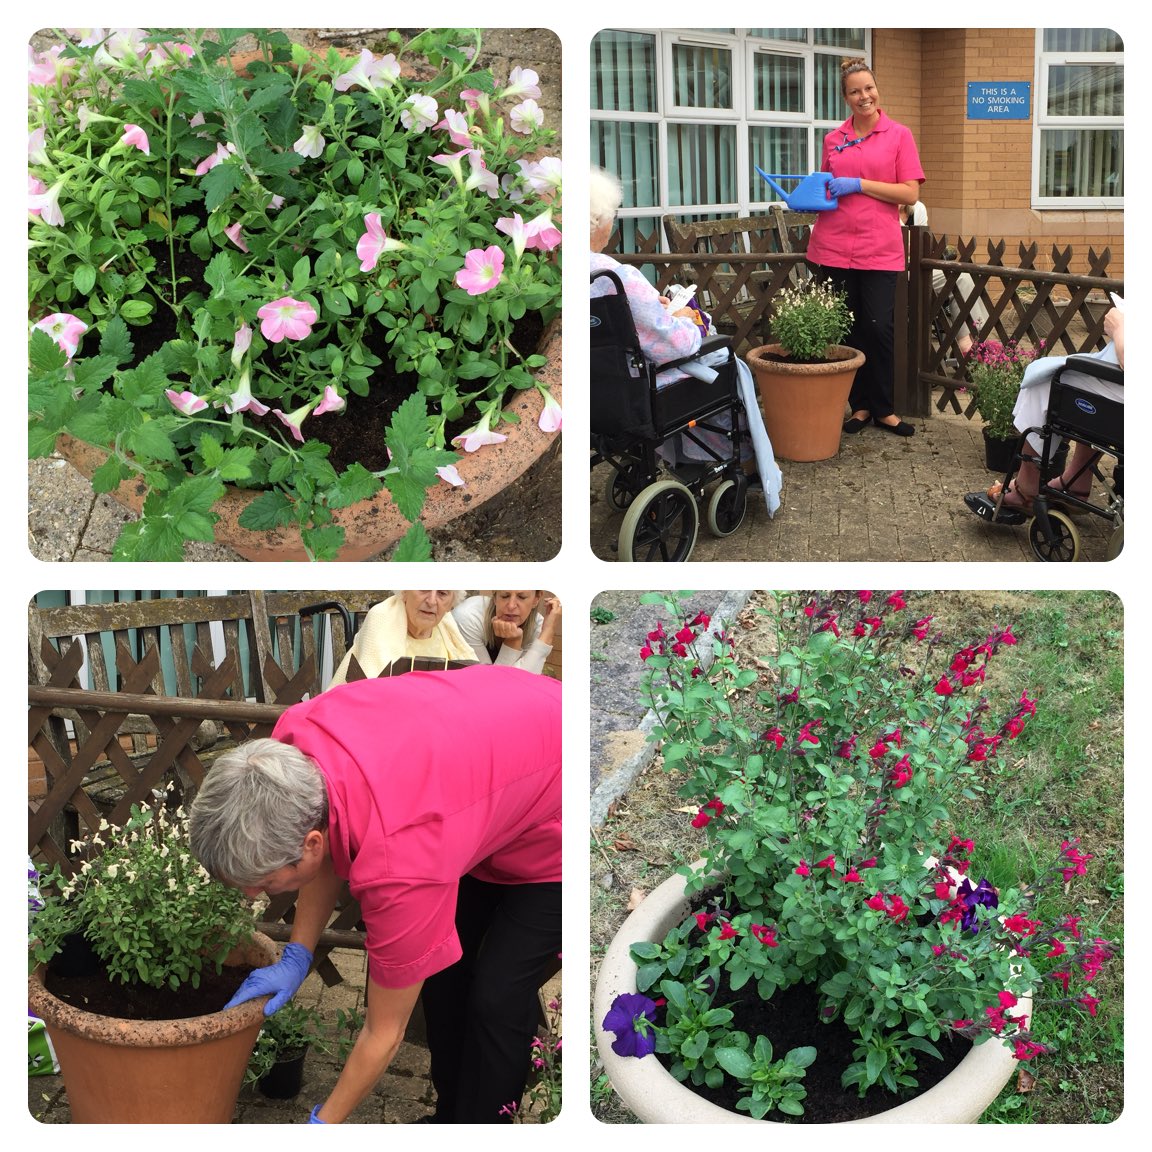 Planting is underway, under close supervision of the patients, they are reading labels and deciding what plant goes in which pot, great work so far 🌹 @LPTnhs @CHSInpatientLPT @LisaMarieMarti3 @borley_alyson @WyevaleGC